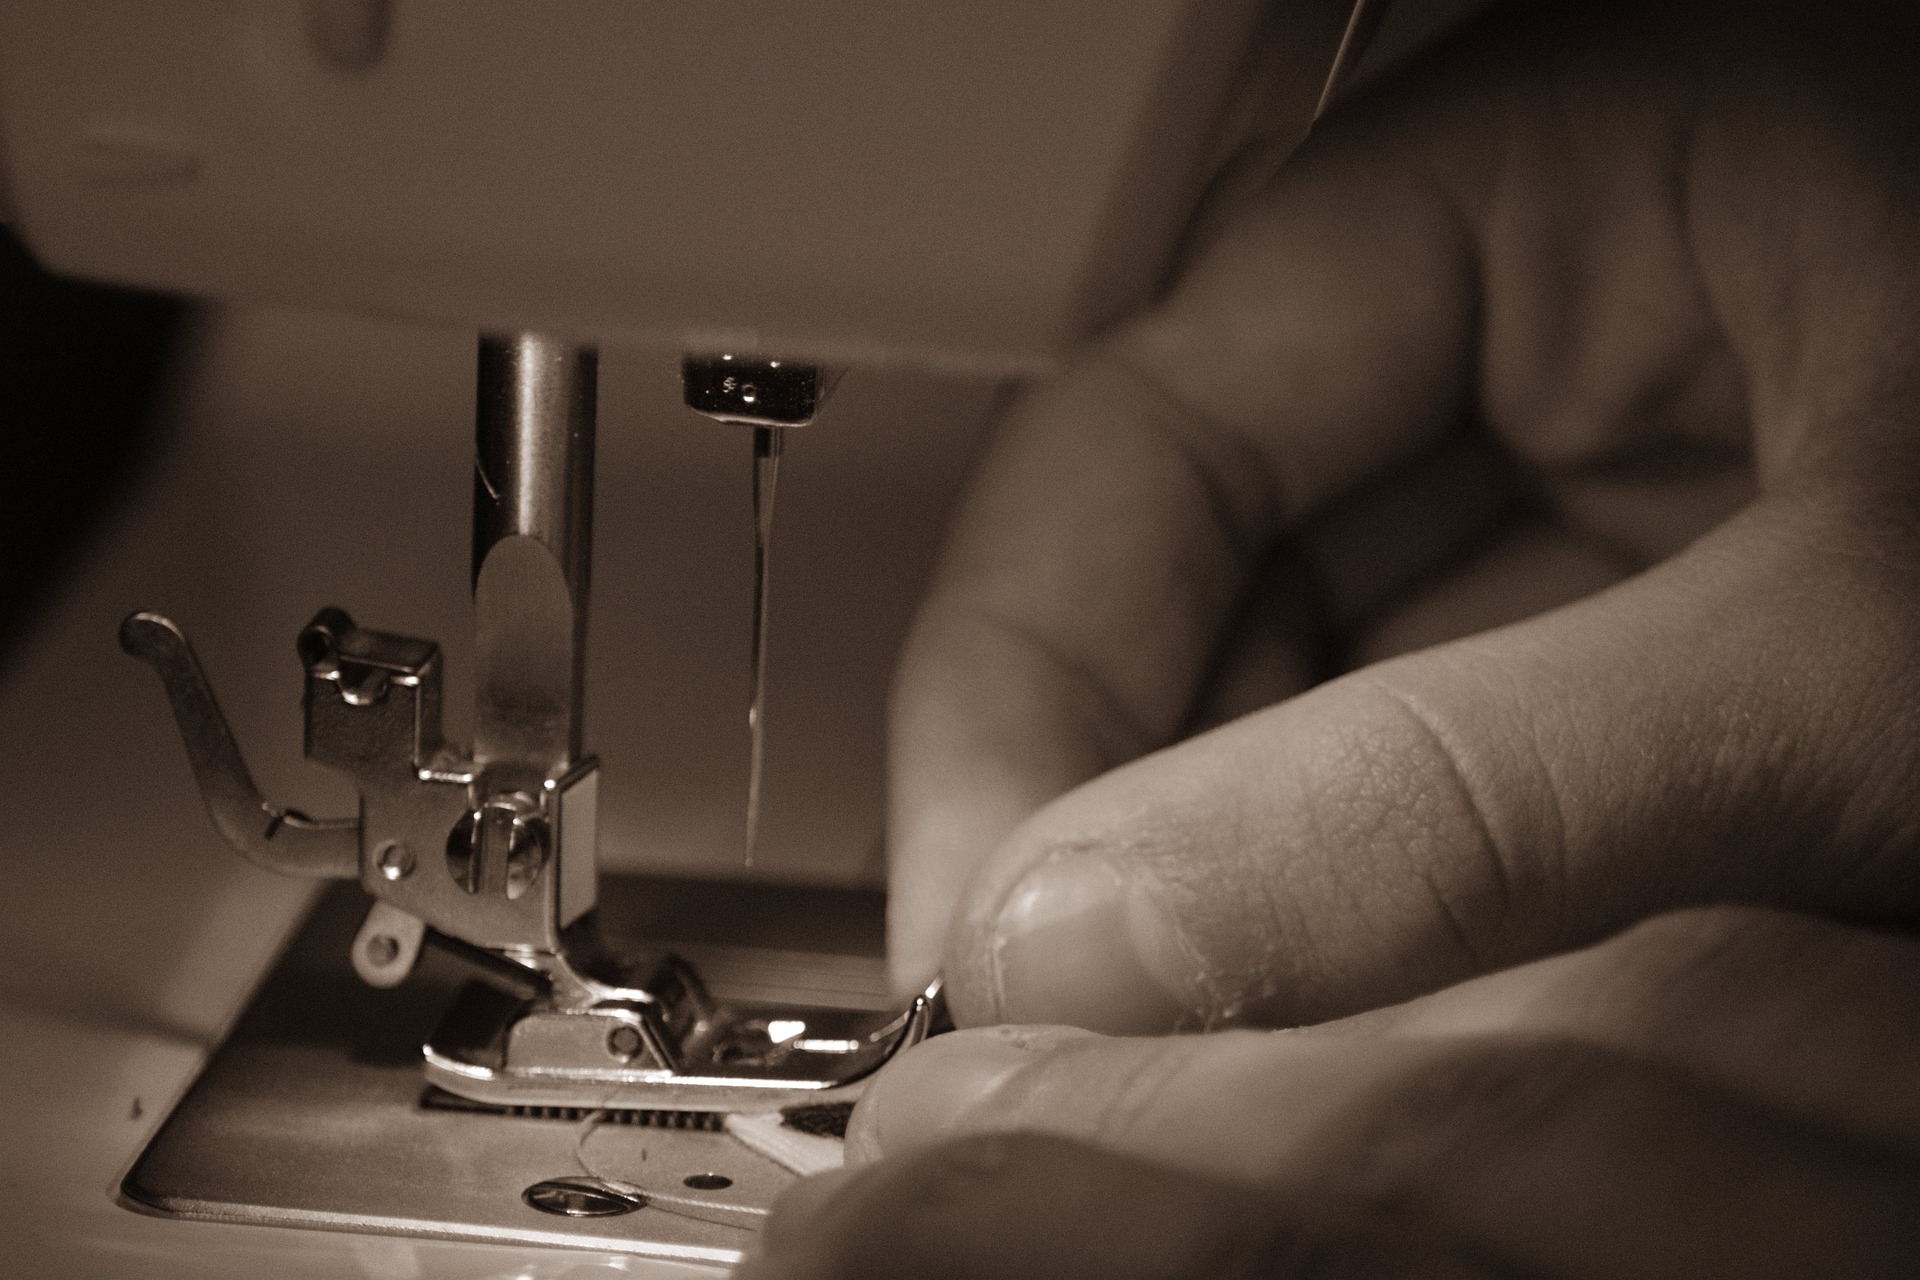 Close up of someone's hands using a sewing machine